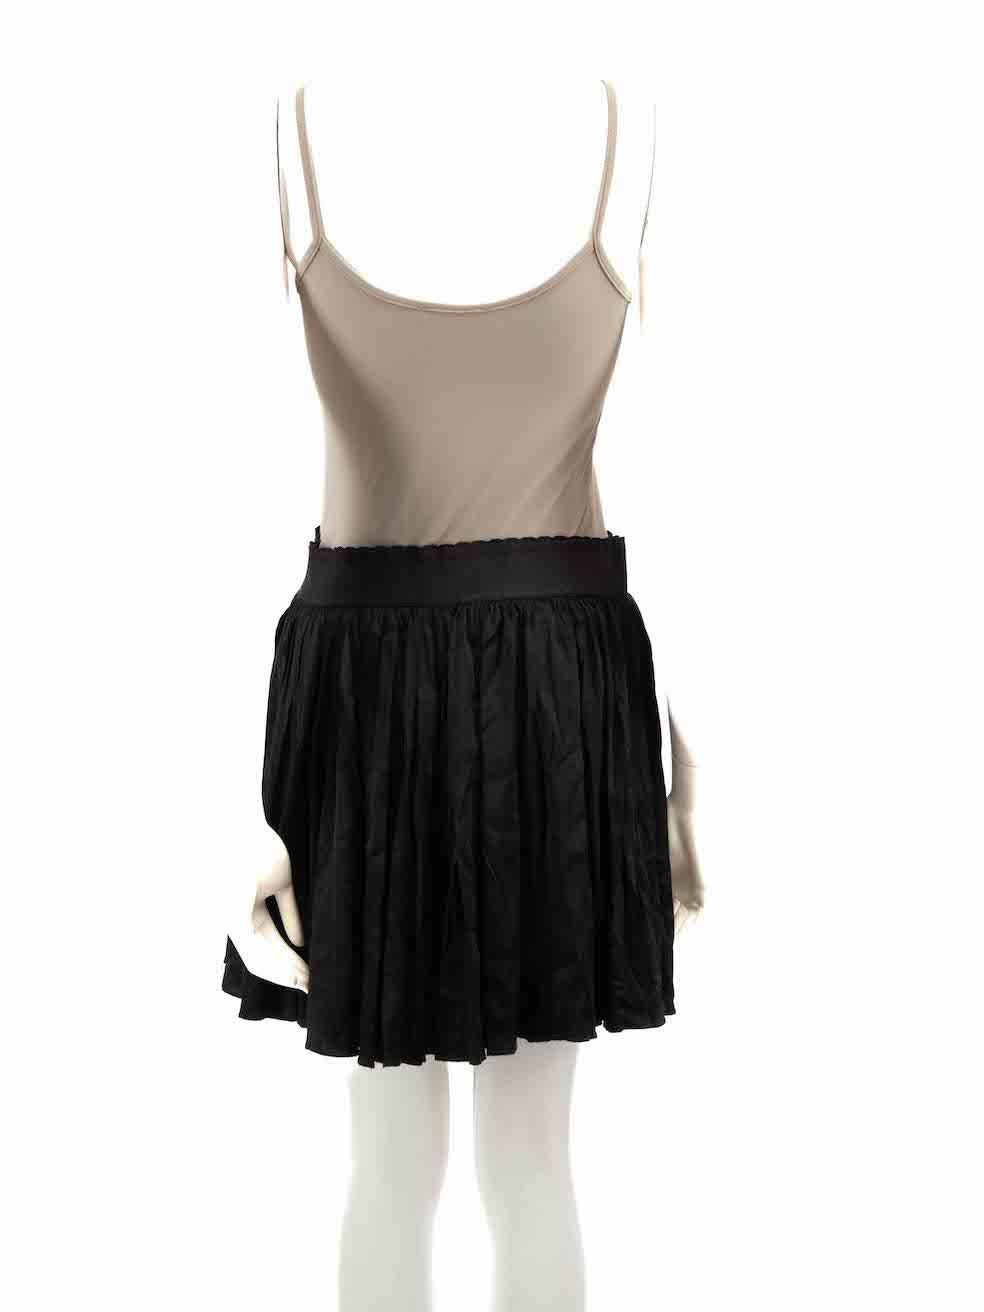 Dolce & Gabbana Black Silk Gathered Mini Skirt Size S In Good Condition For Sale In London, GB